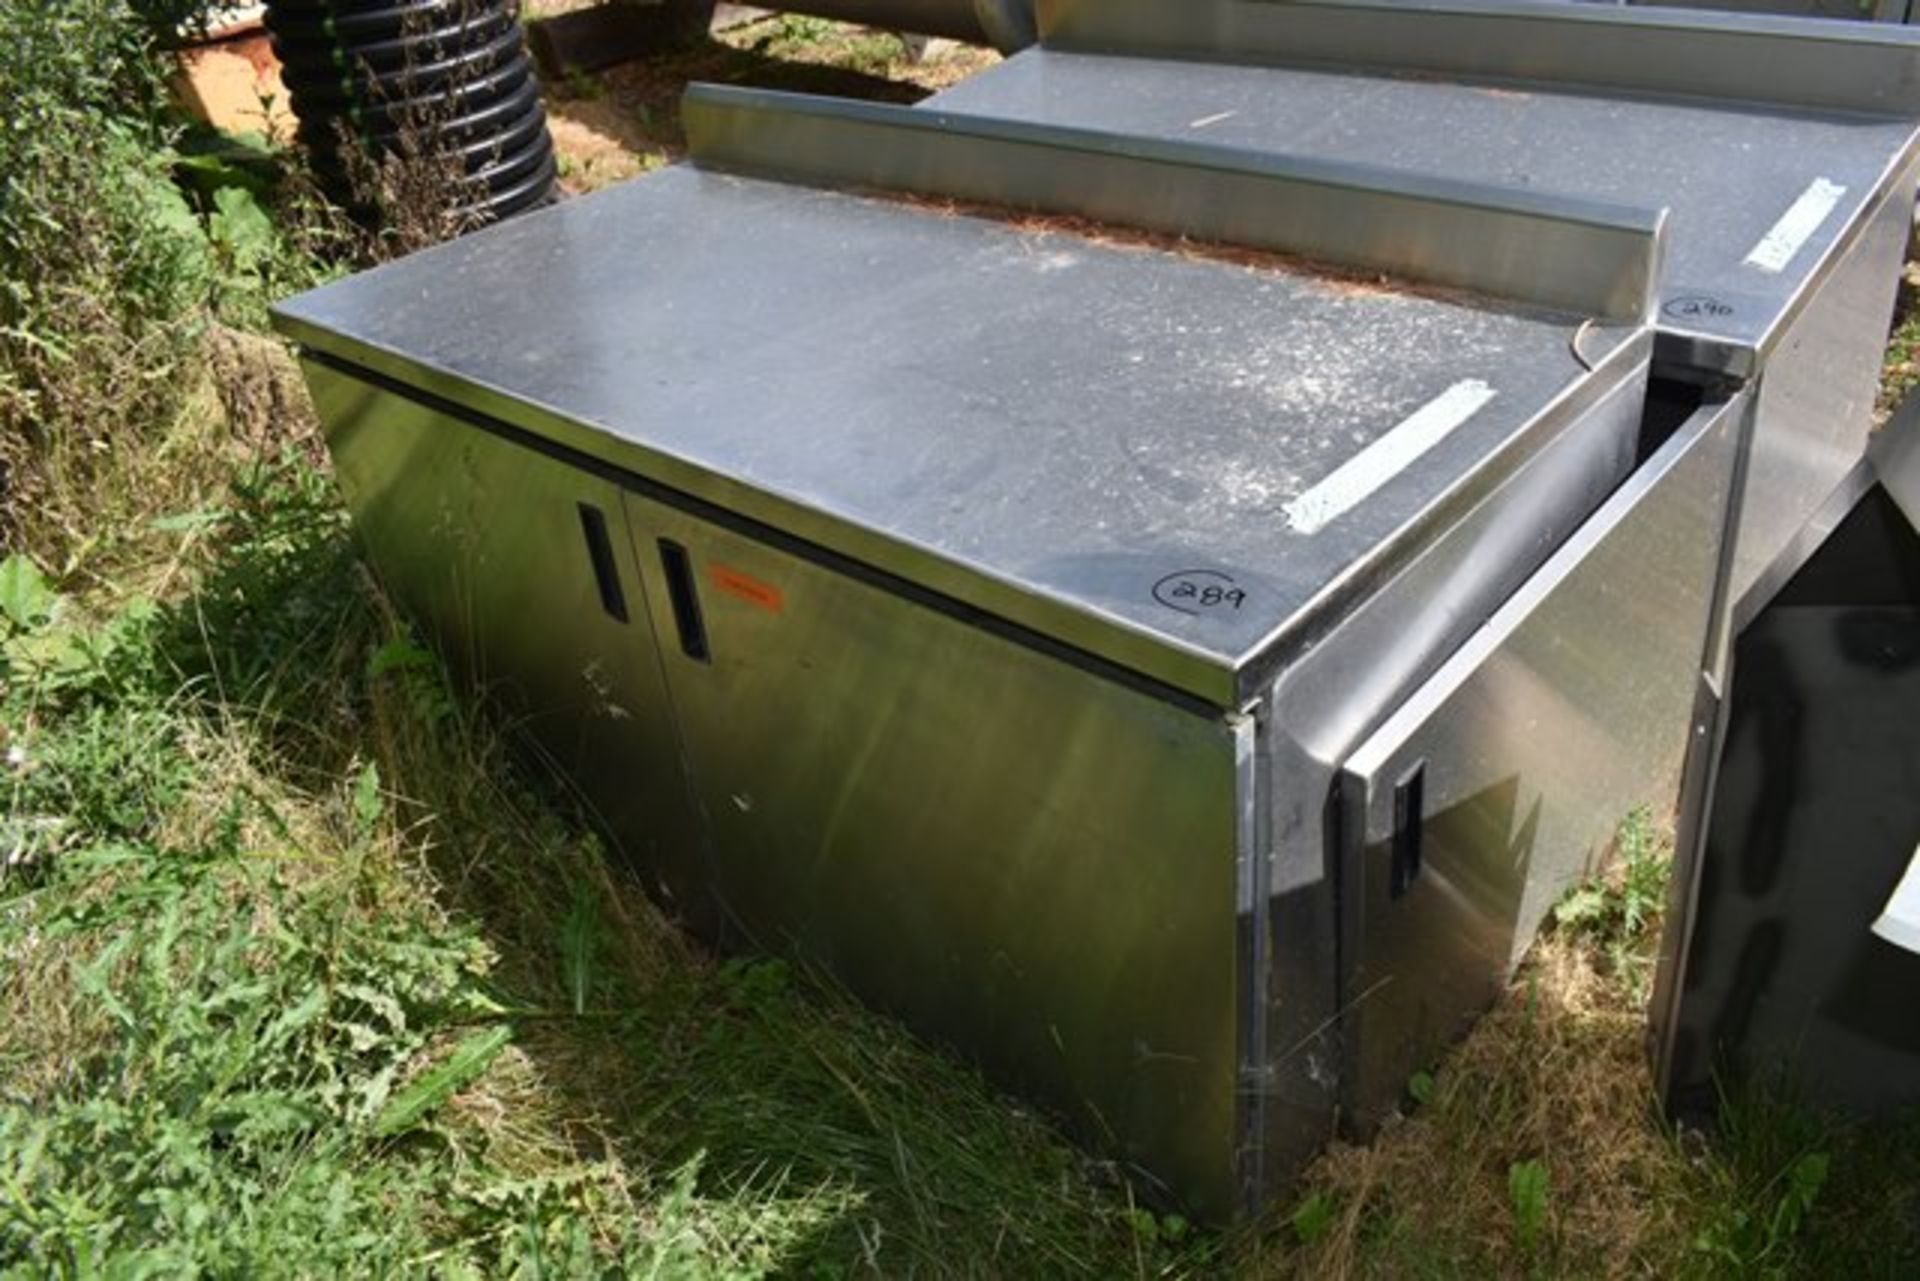 Stainless Steel Table w/2 Door Storage, 60" x 29". Rigging/Loading Fee: $25 (Located in Cambria, WI